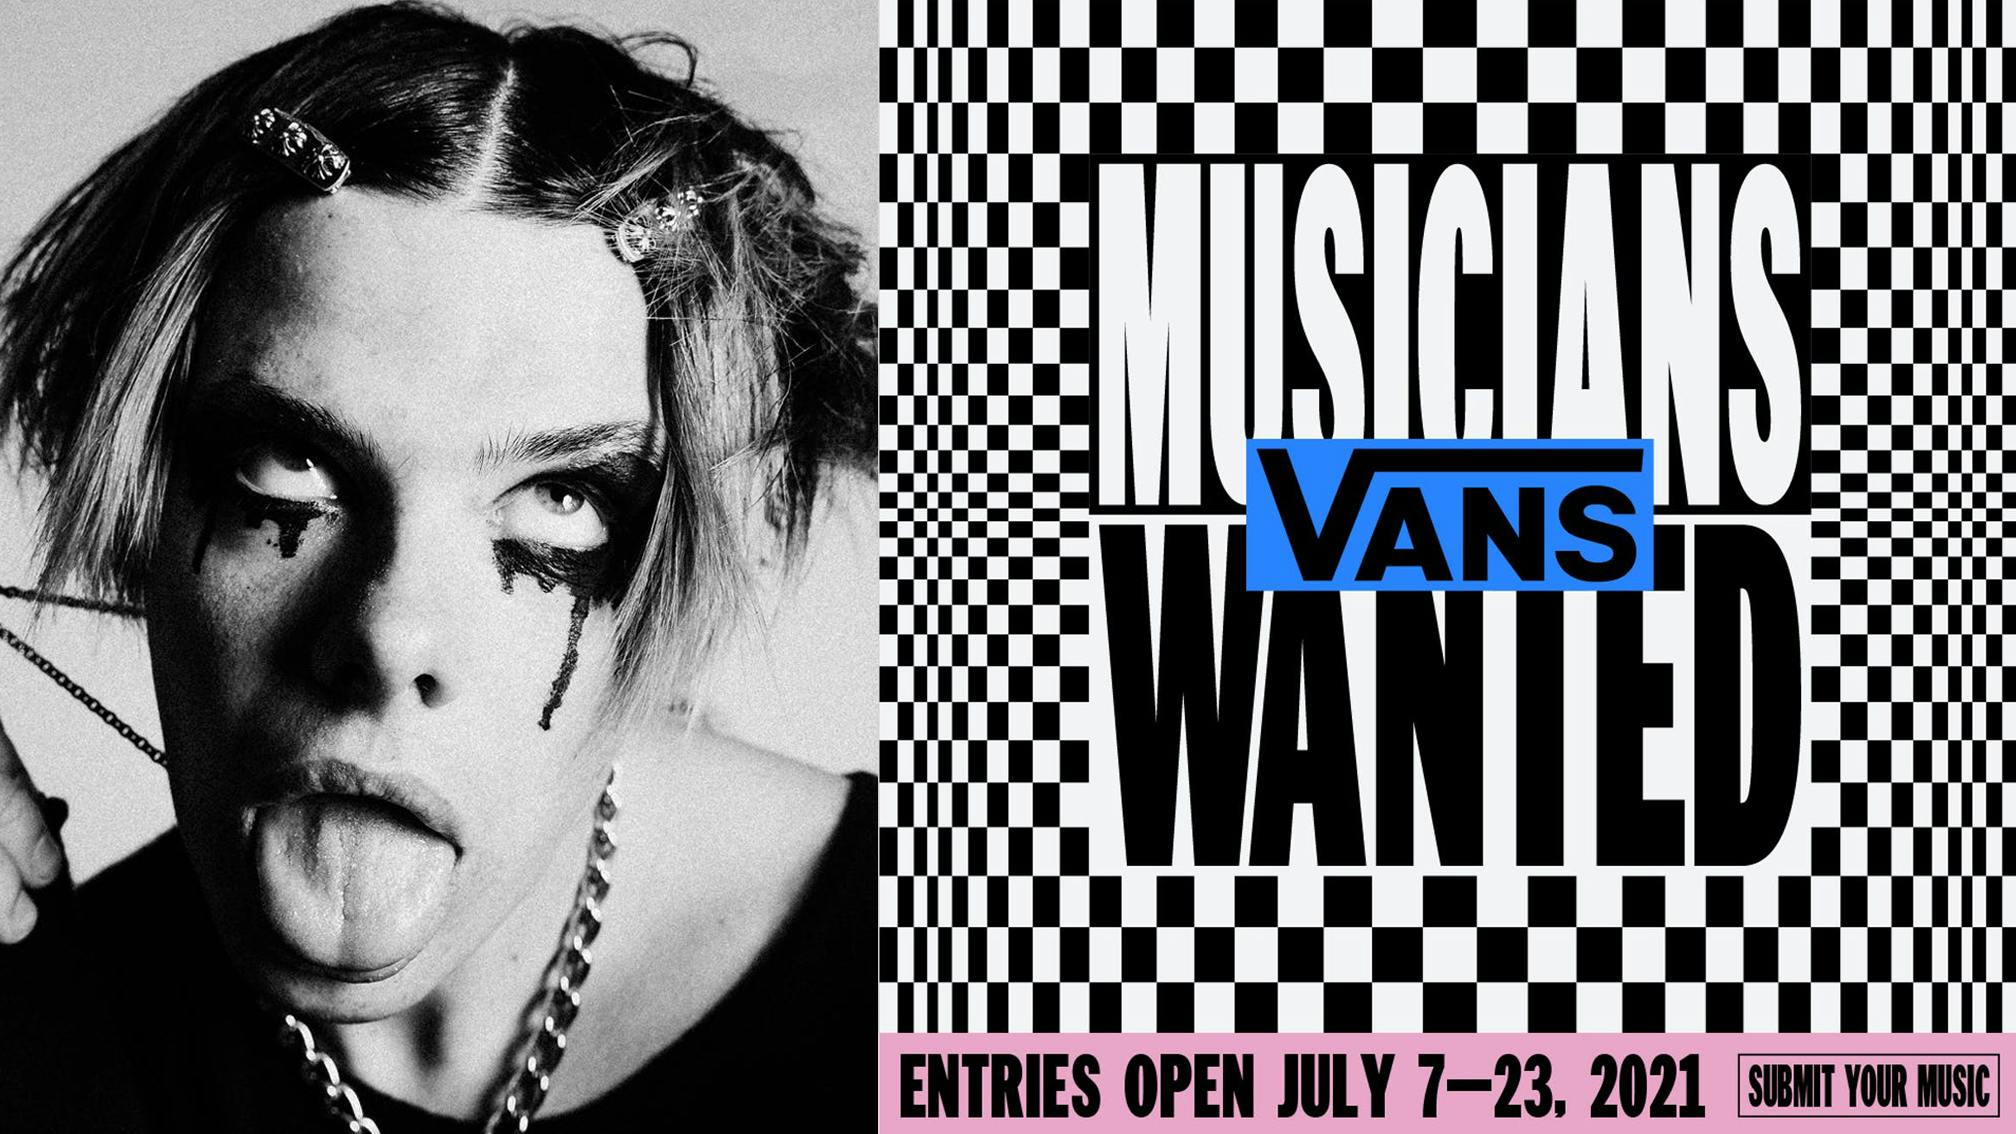 Vans Musicians Wanted returns for 2021: Win the chance to share the stage with YUNGBLUD